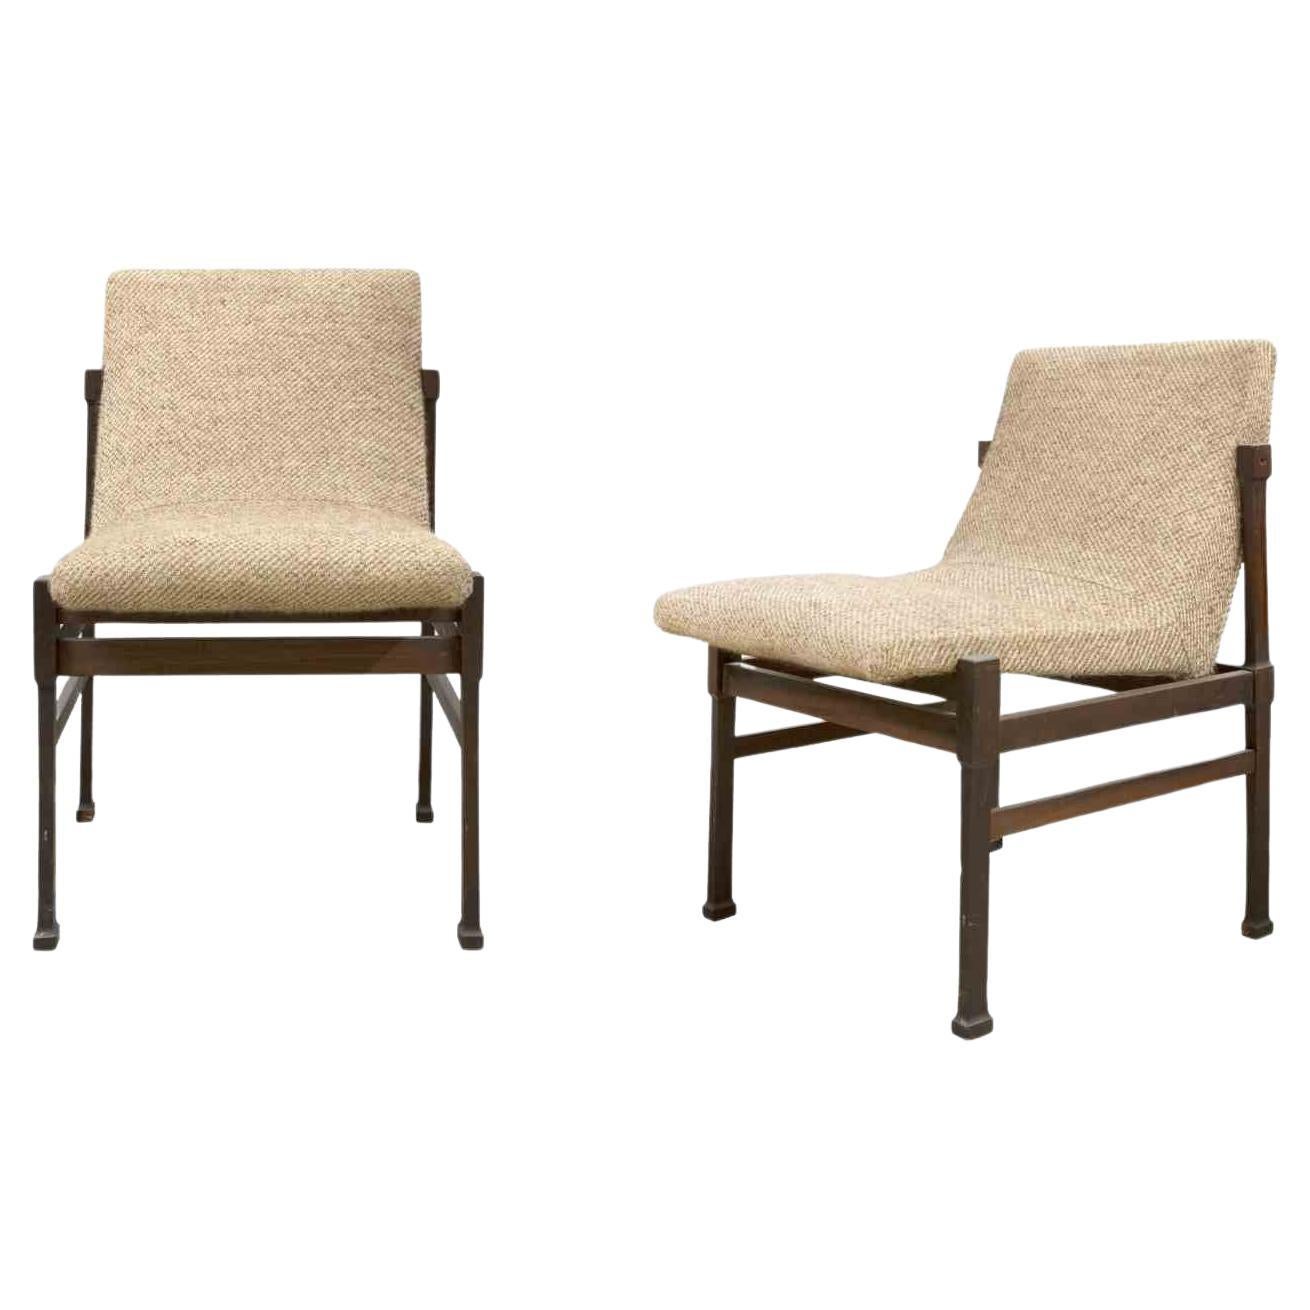 Pair of Vintage Scandinavian Chairs, Mid-20th Century For Sale